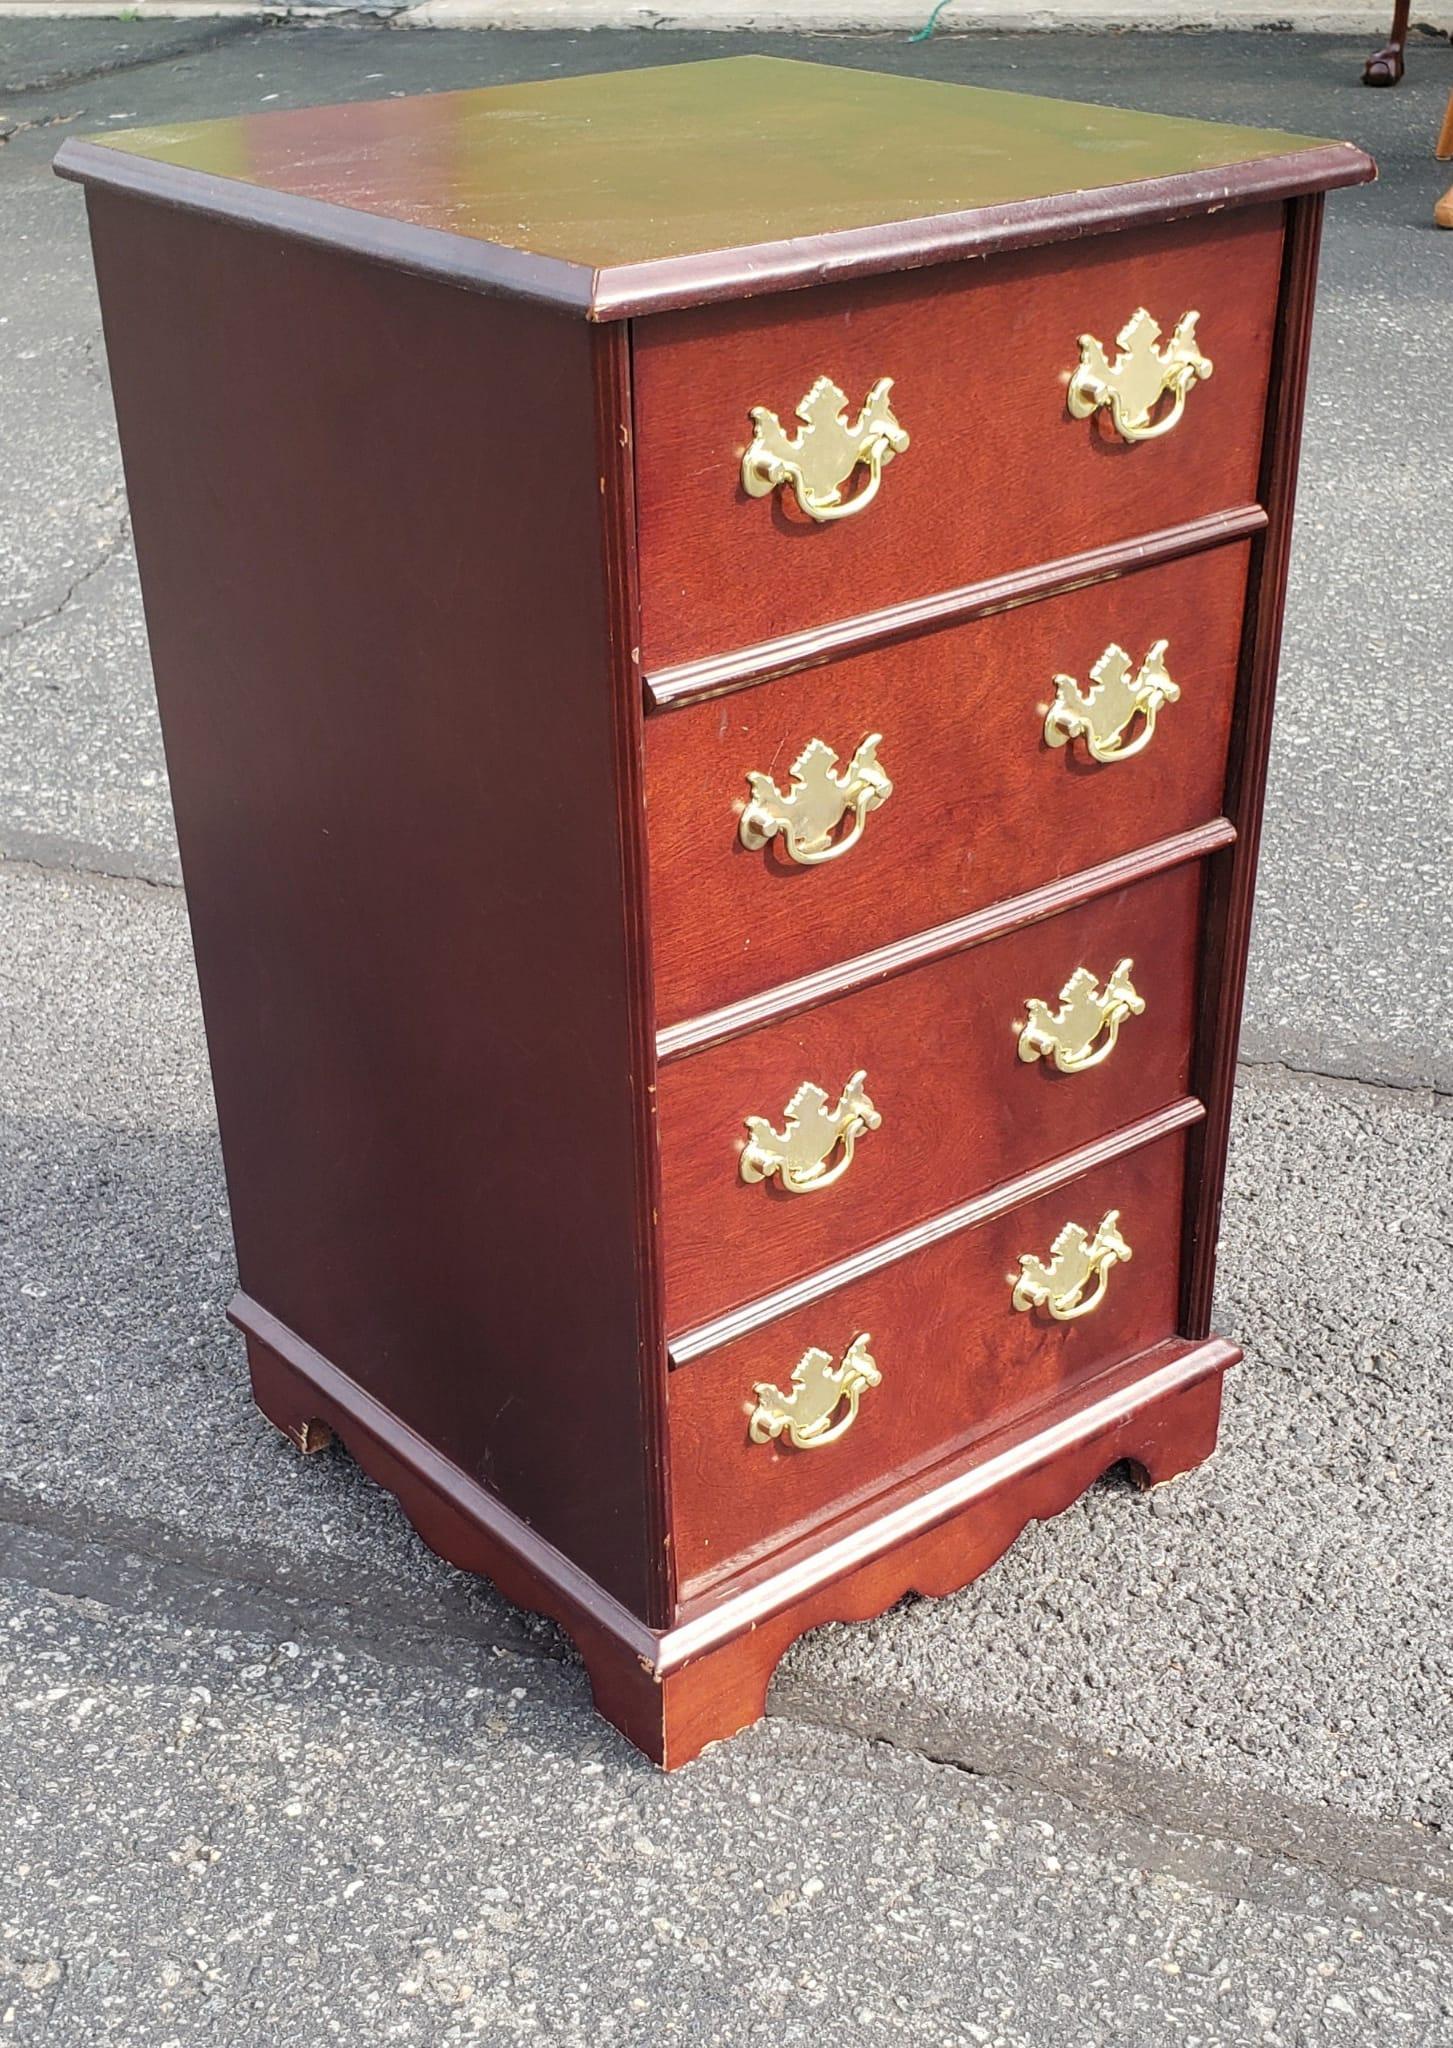 Avery cute two drawer Chippendale Style filing cabinet in good vintage condition in mahogany finish. Measures 16.5